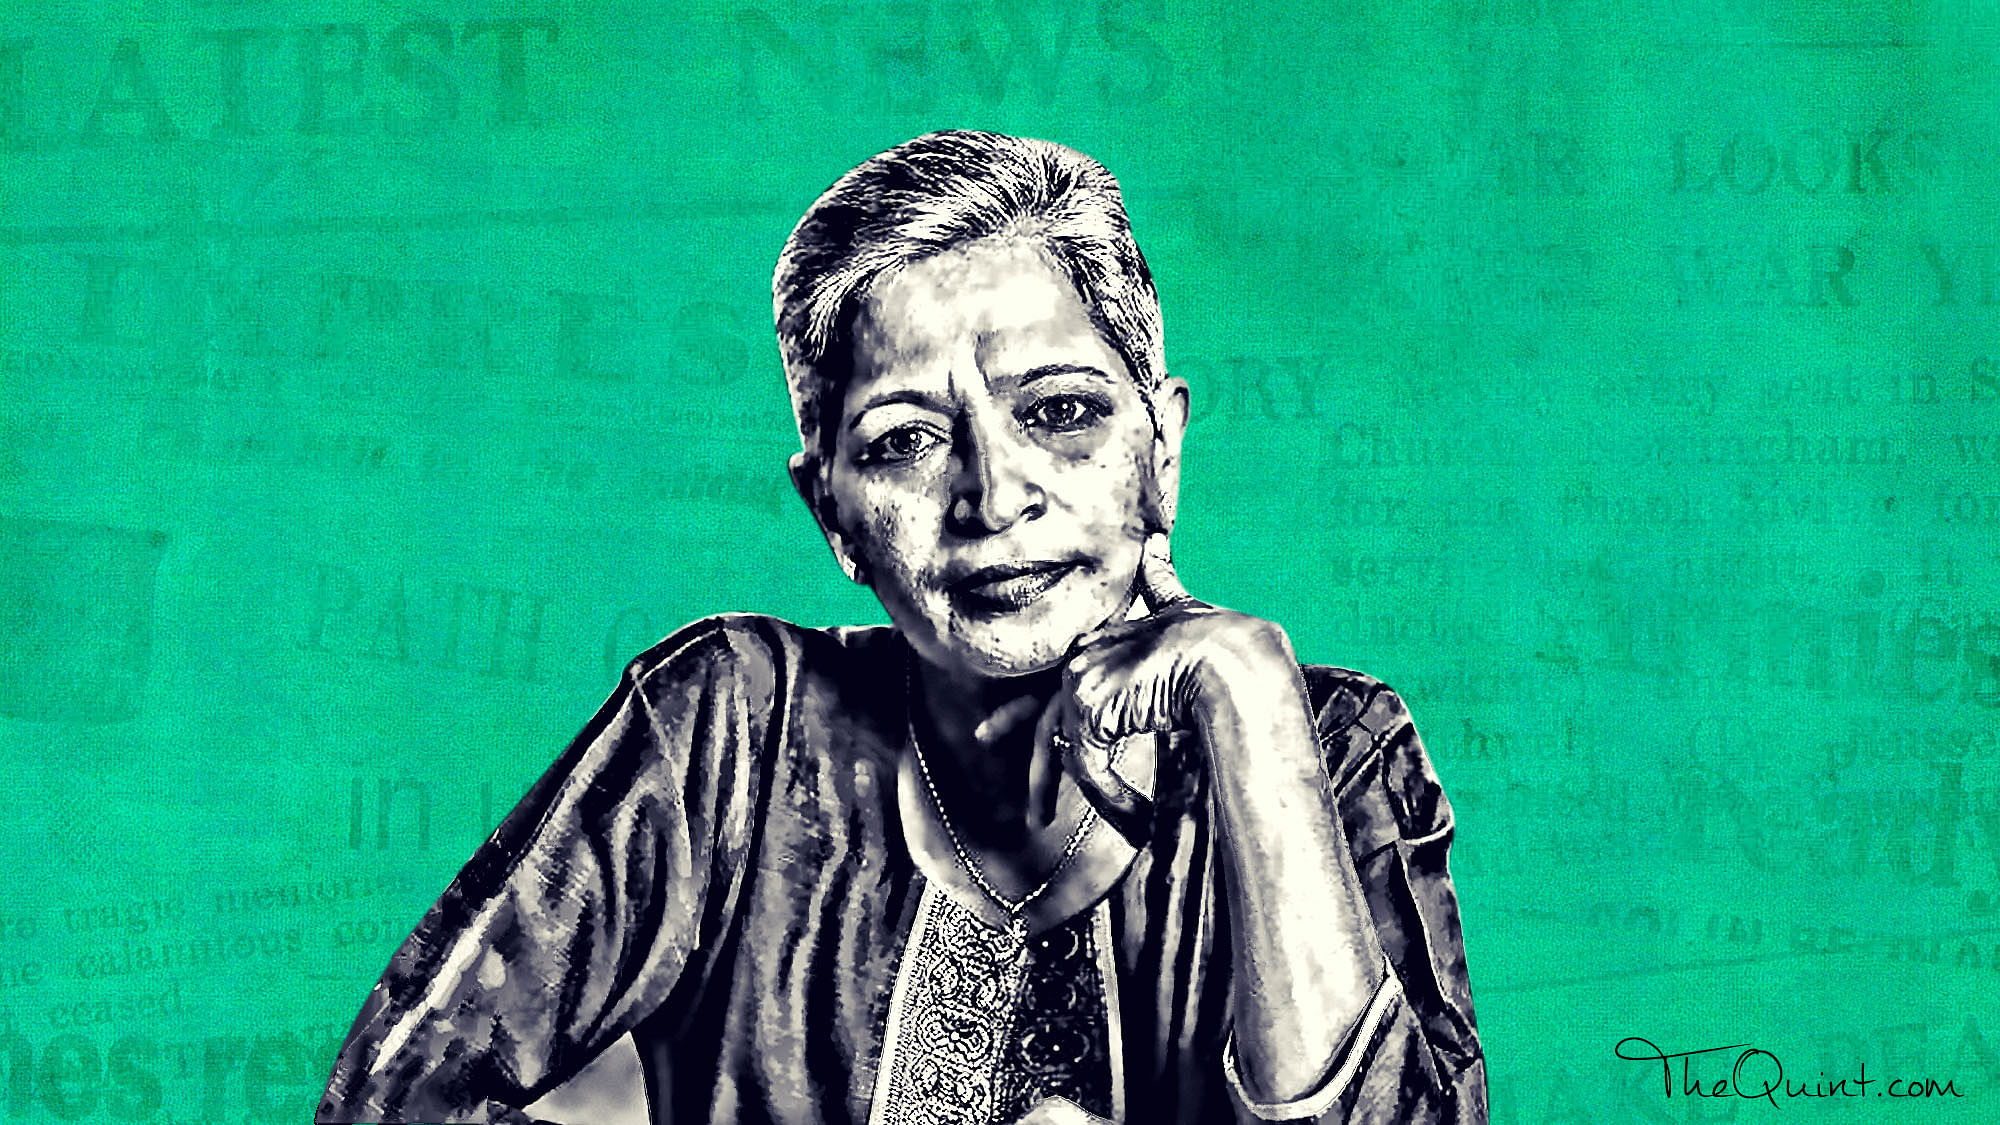 Naveen Kumar, a right-wing activist from Maddur in Karnataka, is the key suspect in the Gauri Lankesh’s murder case.